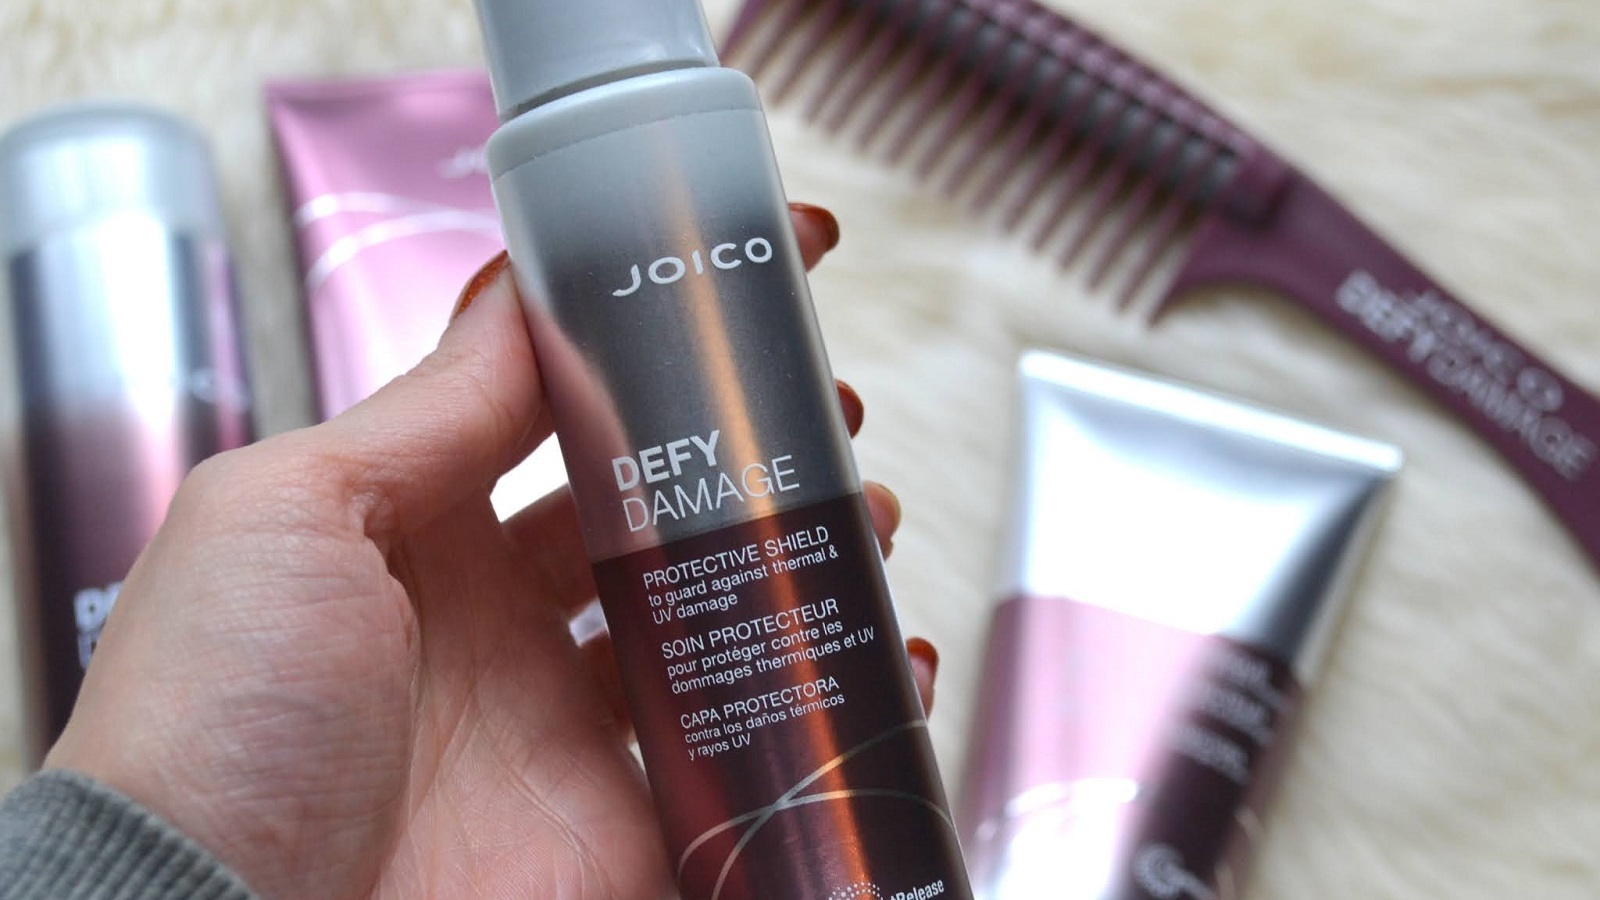 Joico Shampoo Review: Does It Really Work on Your Hair?